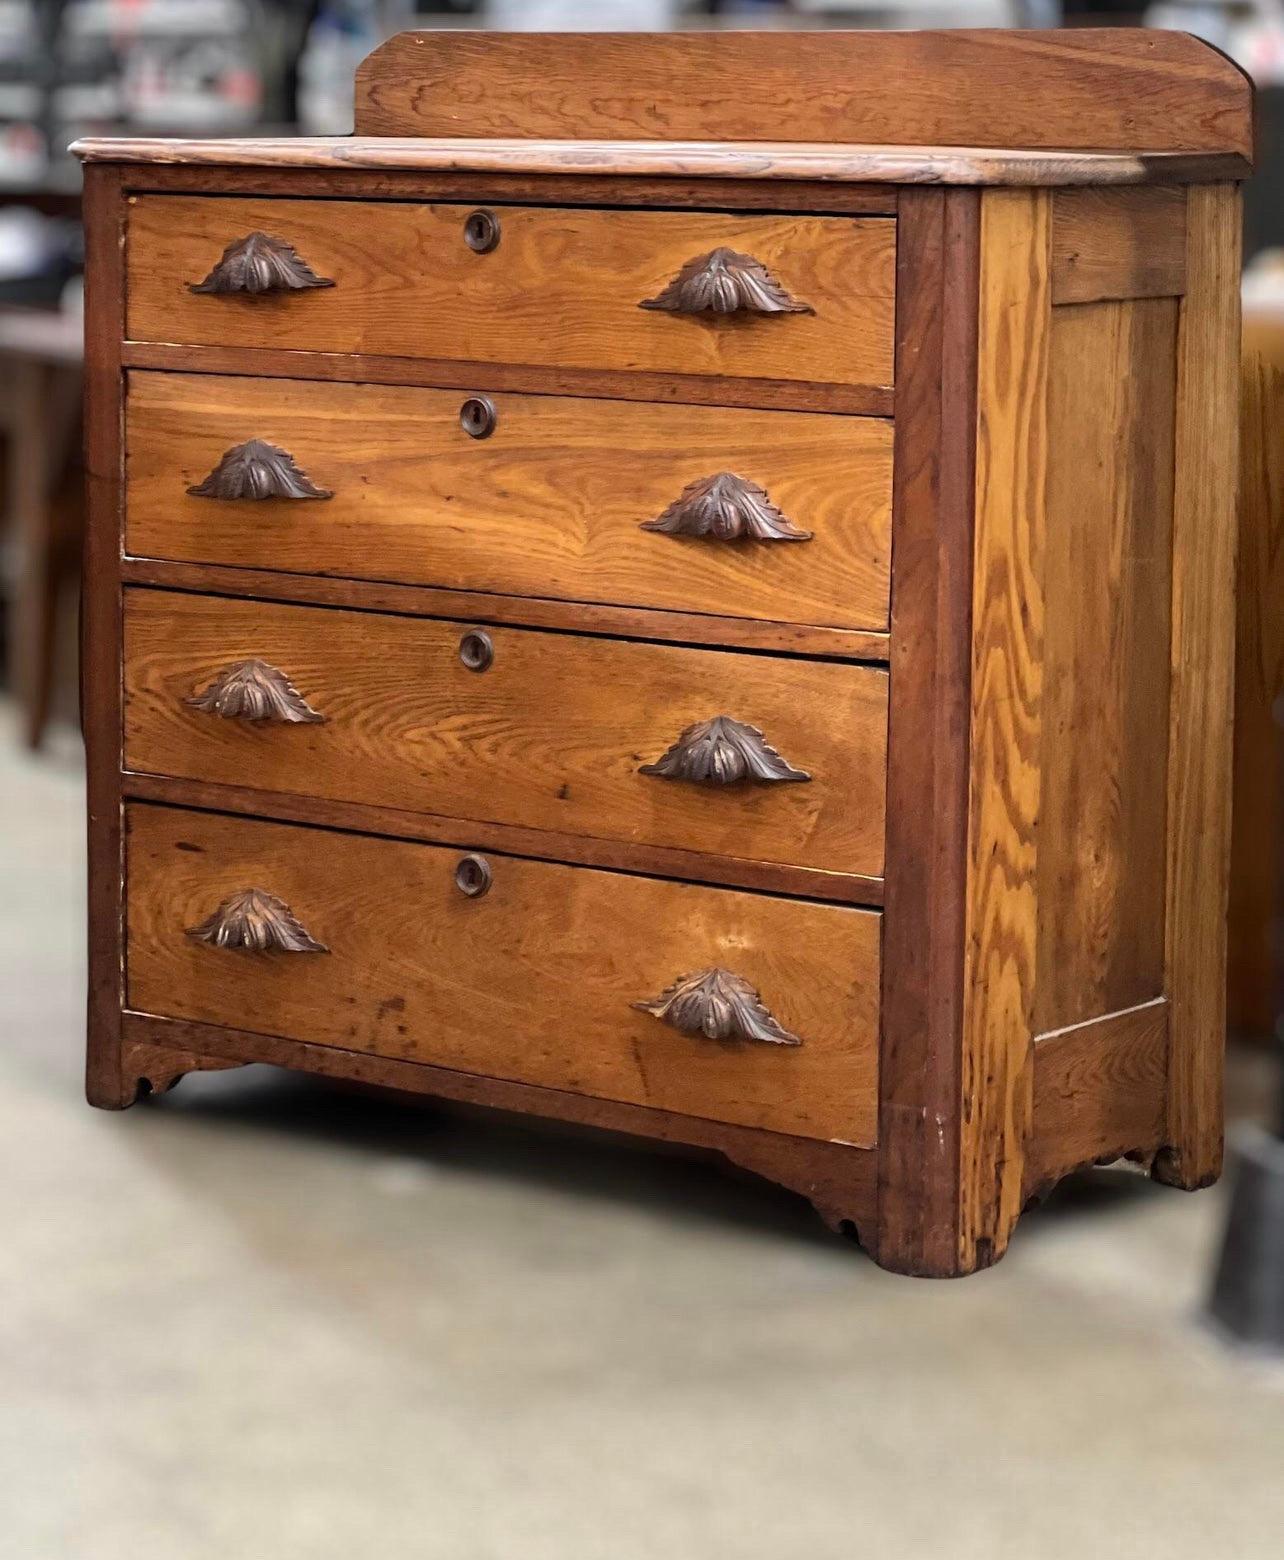 Vintage walnut chest of drawers with carved wood and leaf drawer pulls. Drawers are put together with handmade dovetail joints. Well made with very old construction. Perfect for a rustic Primitive farmhouse decor! This is a beautiful piece with lots